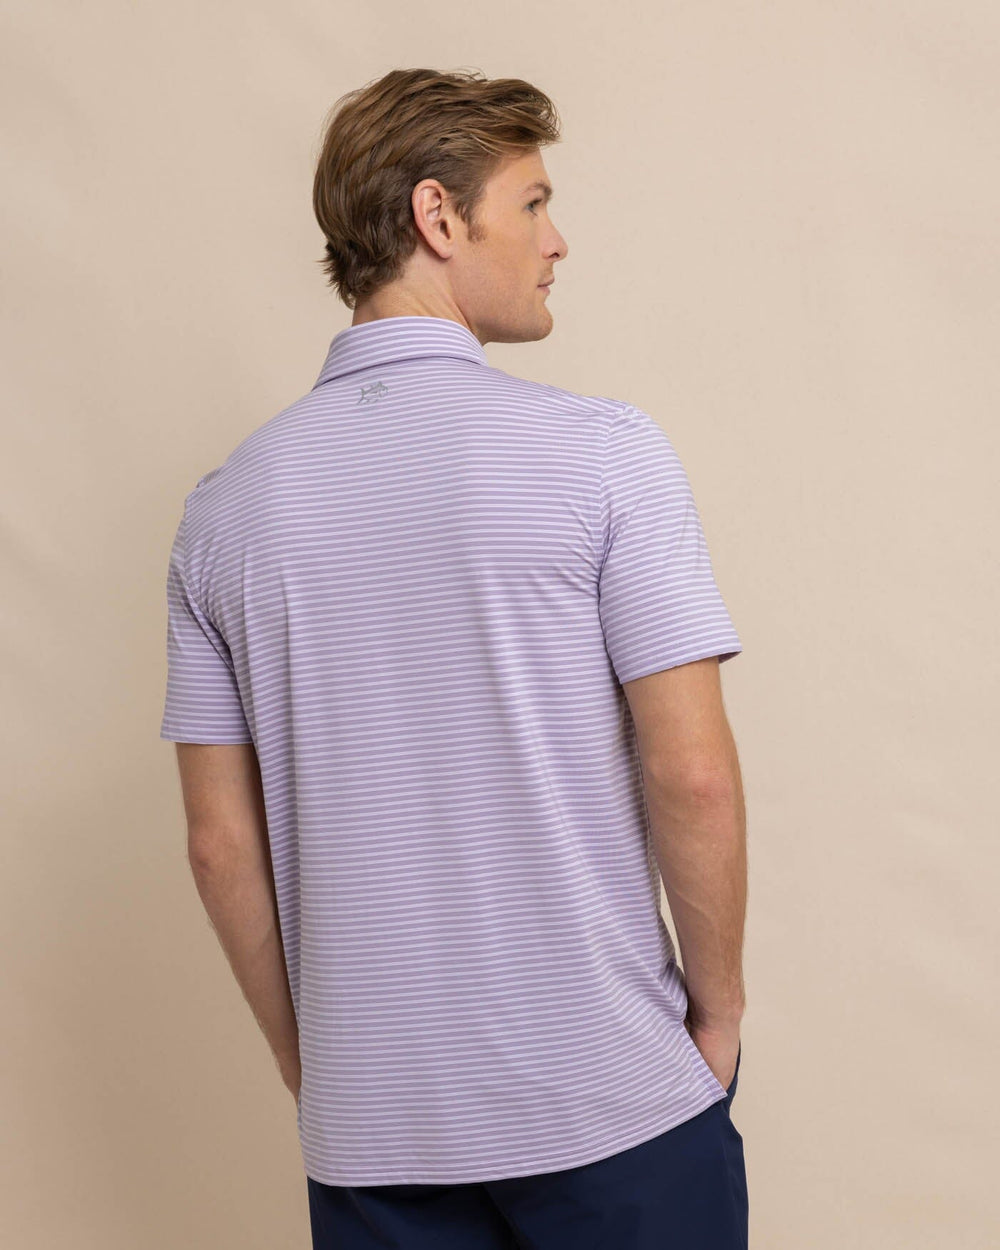 The back view of the Southern Tide brrr eeze Beattie Stripe Performance Polo by Southern Tide - Wisteria Purple